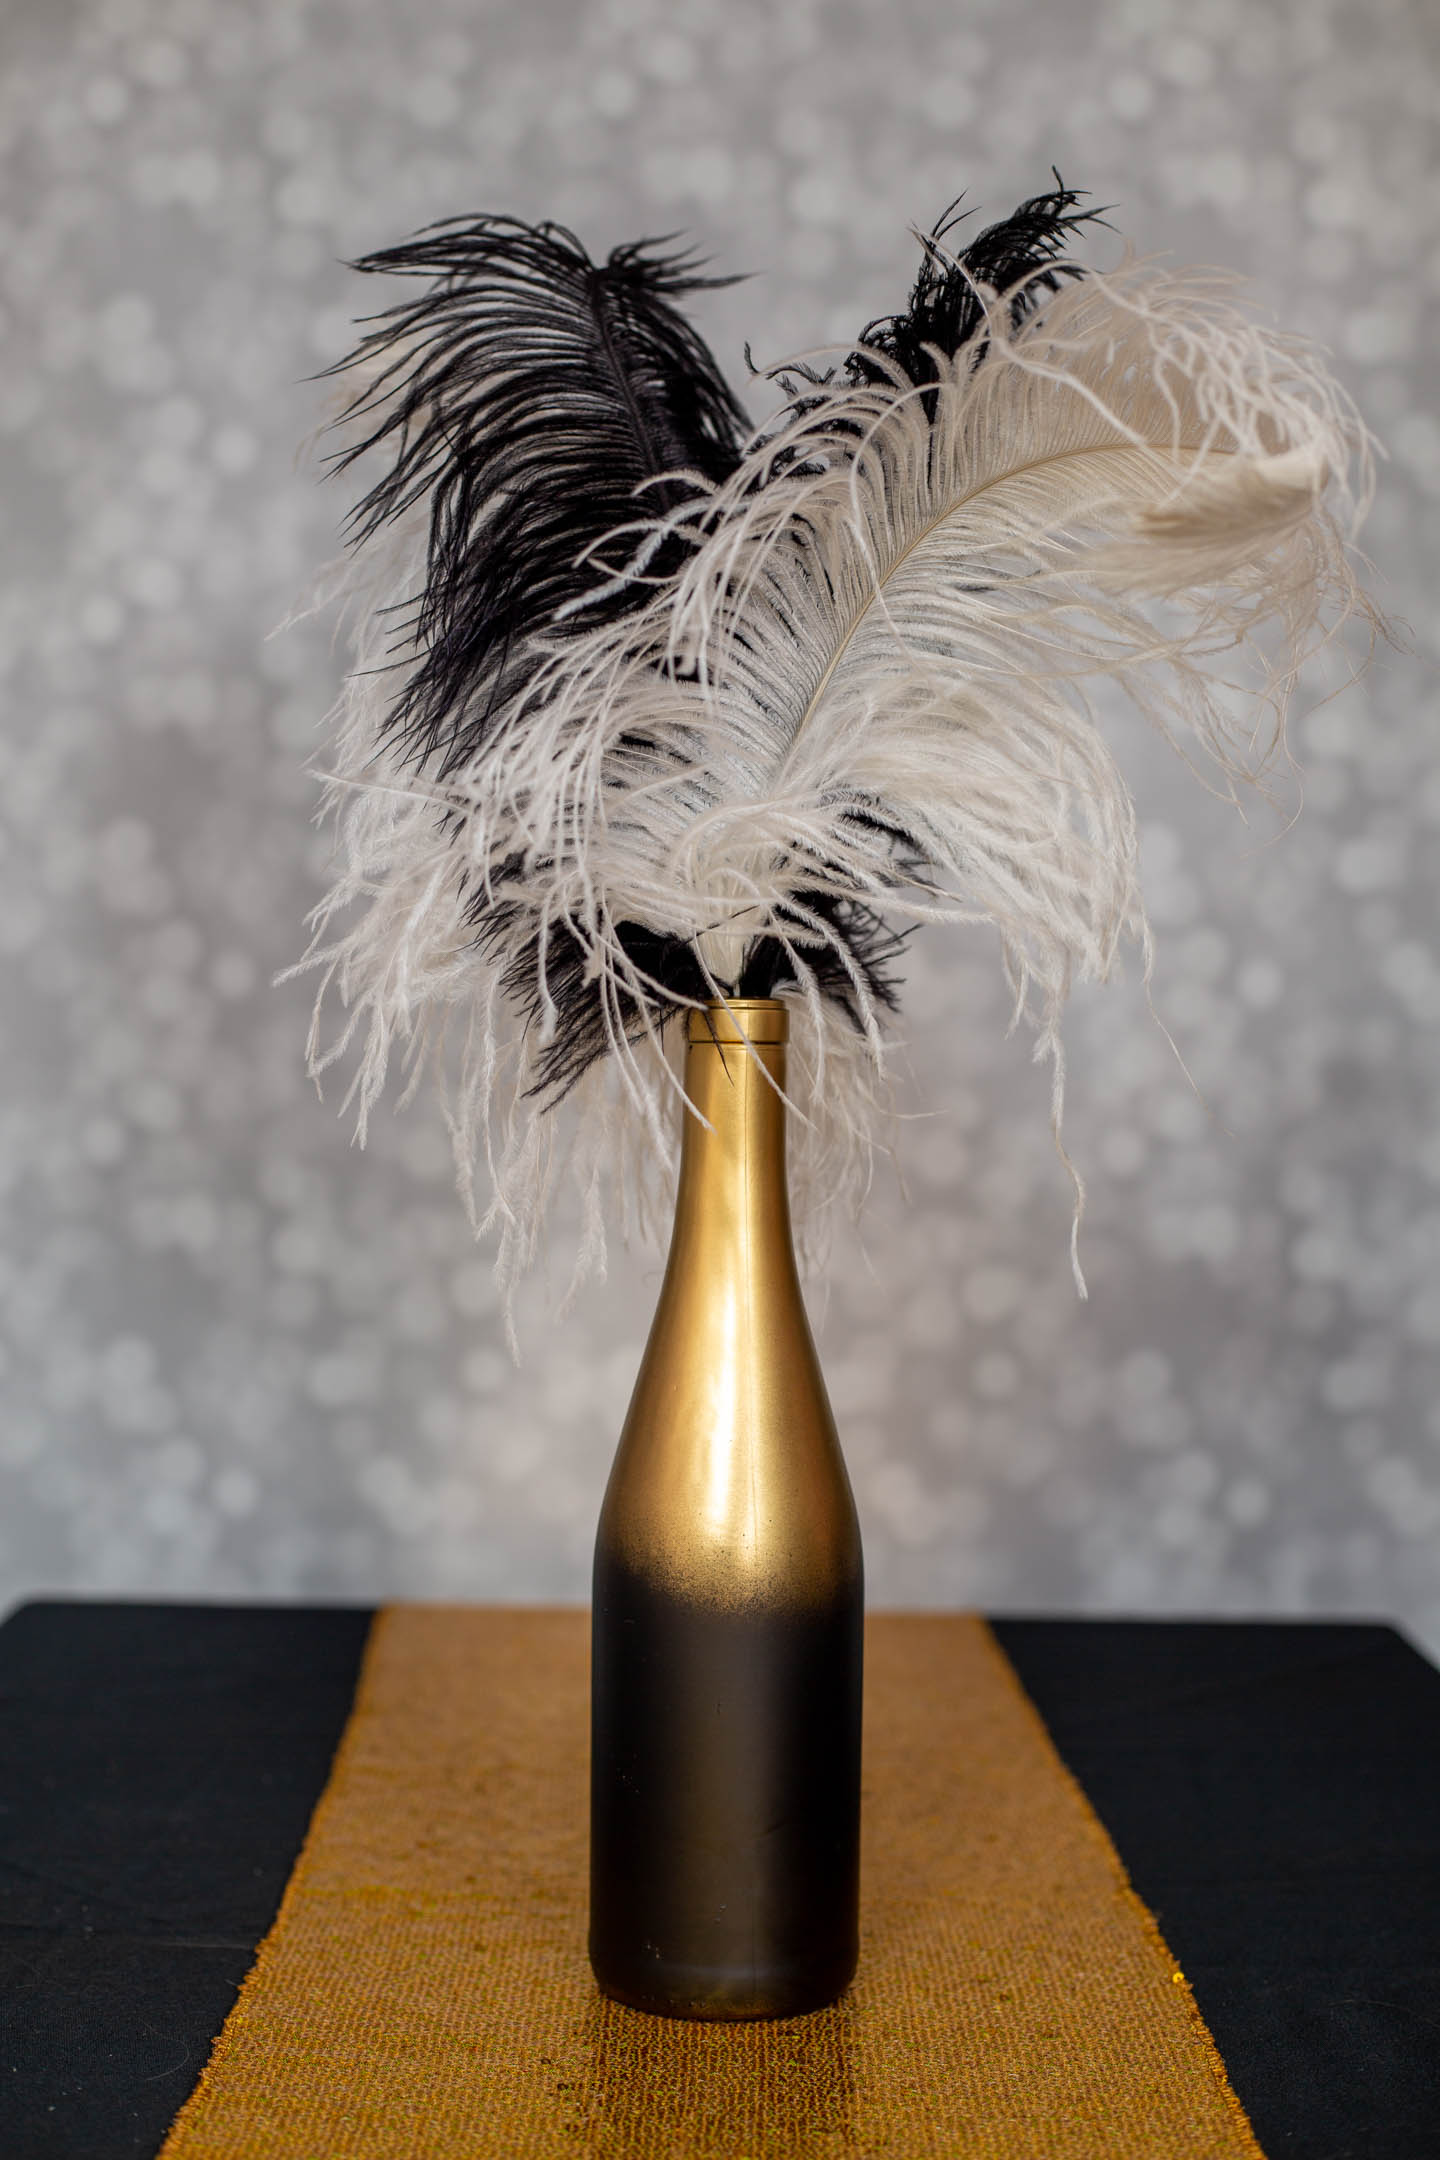 Small Great Gatsby centerpiece made with ostrich feathers and a wine bottle